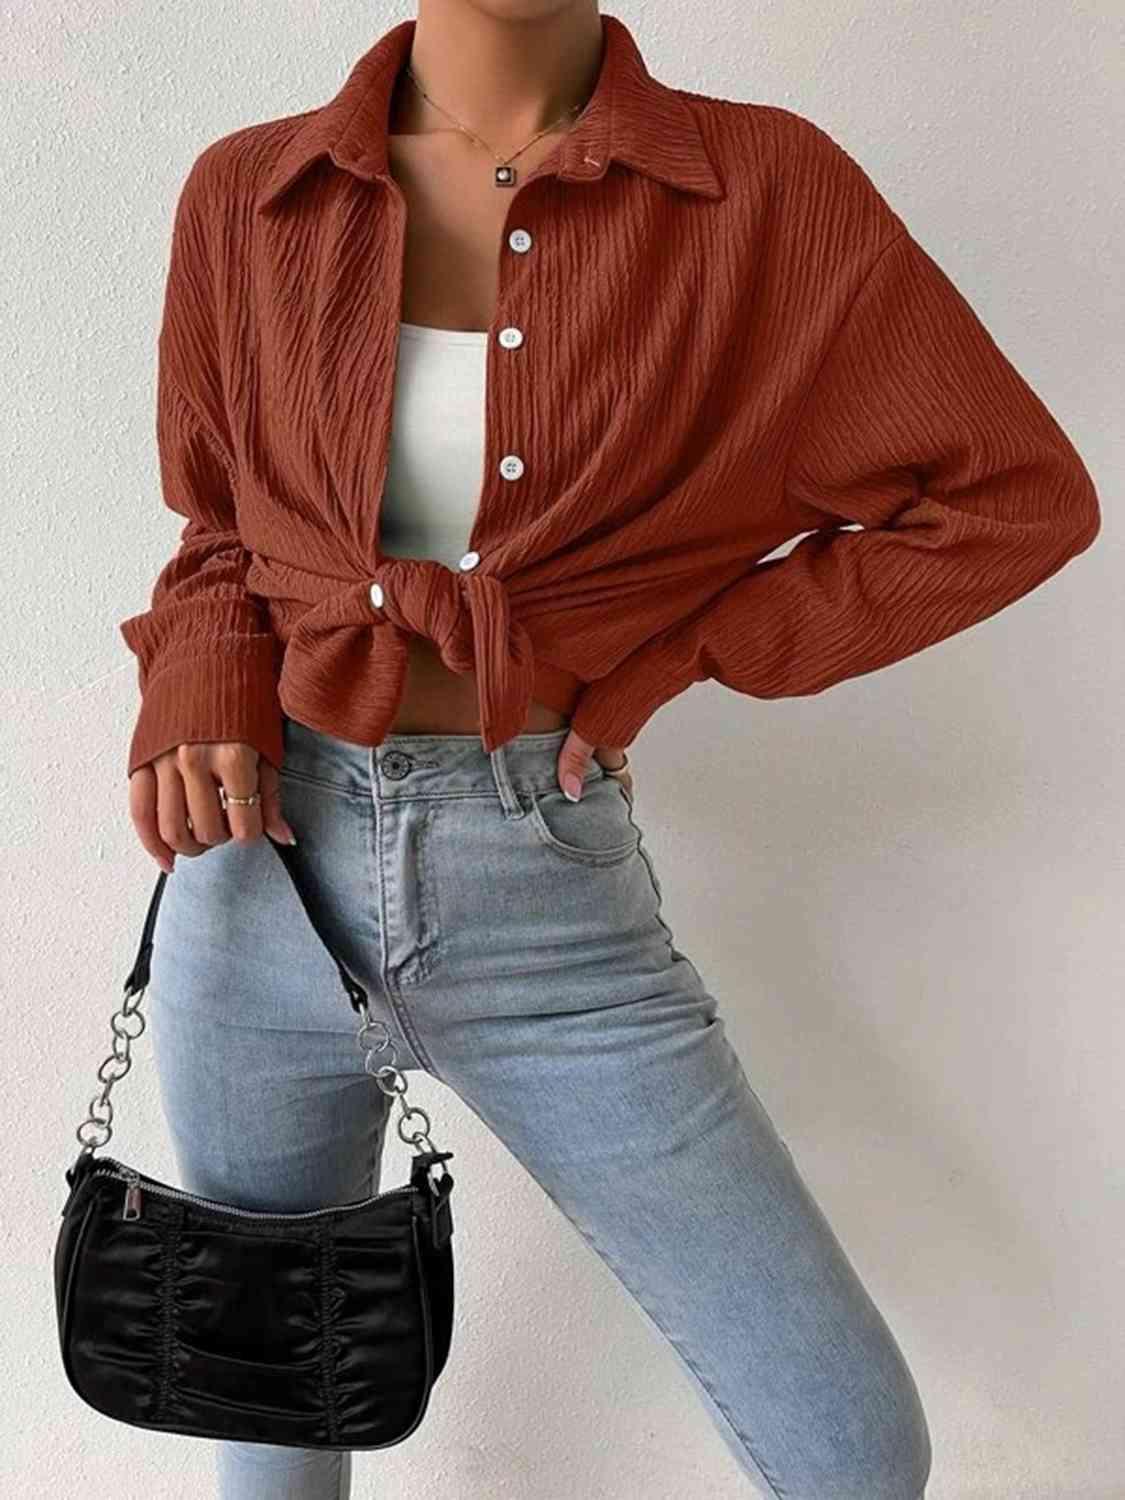 a woman wearing a red shirt and jeans holding a black purse